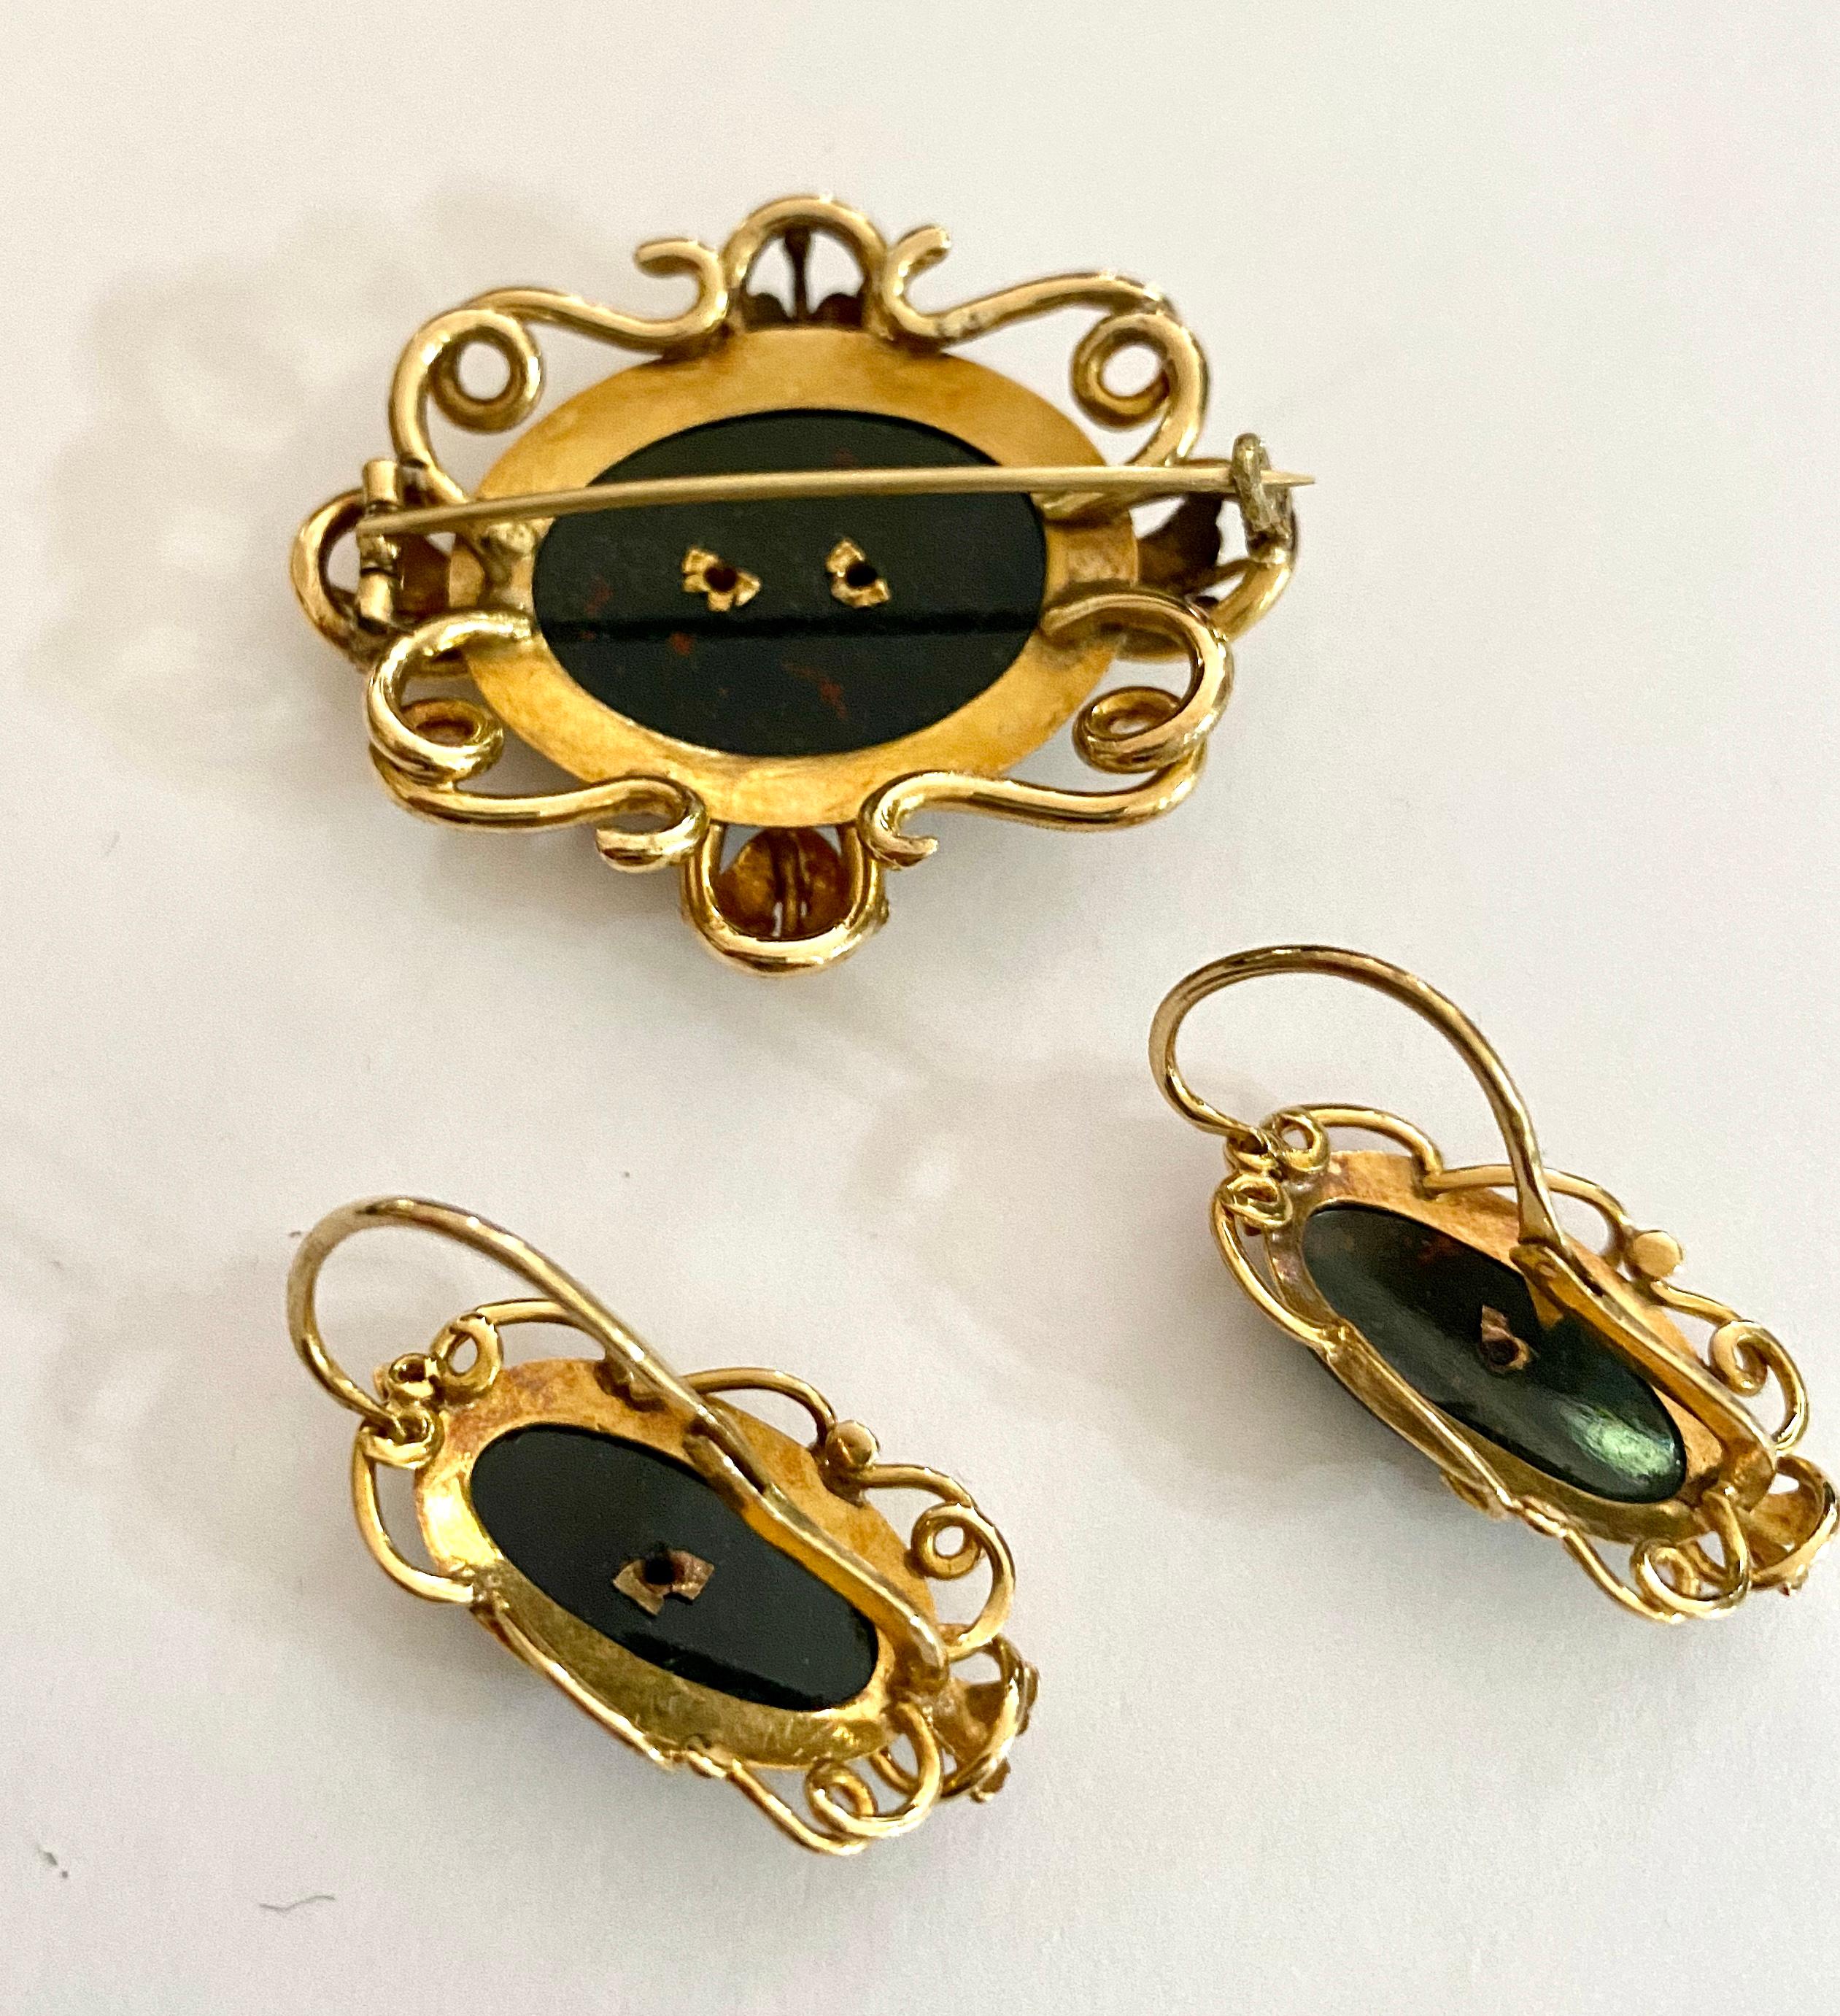 Petit Parure, 18 Karat Yellow Gold Boche and Earrings, Brussels  1850 In Good Condition For Sale In Heerlen, NL